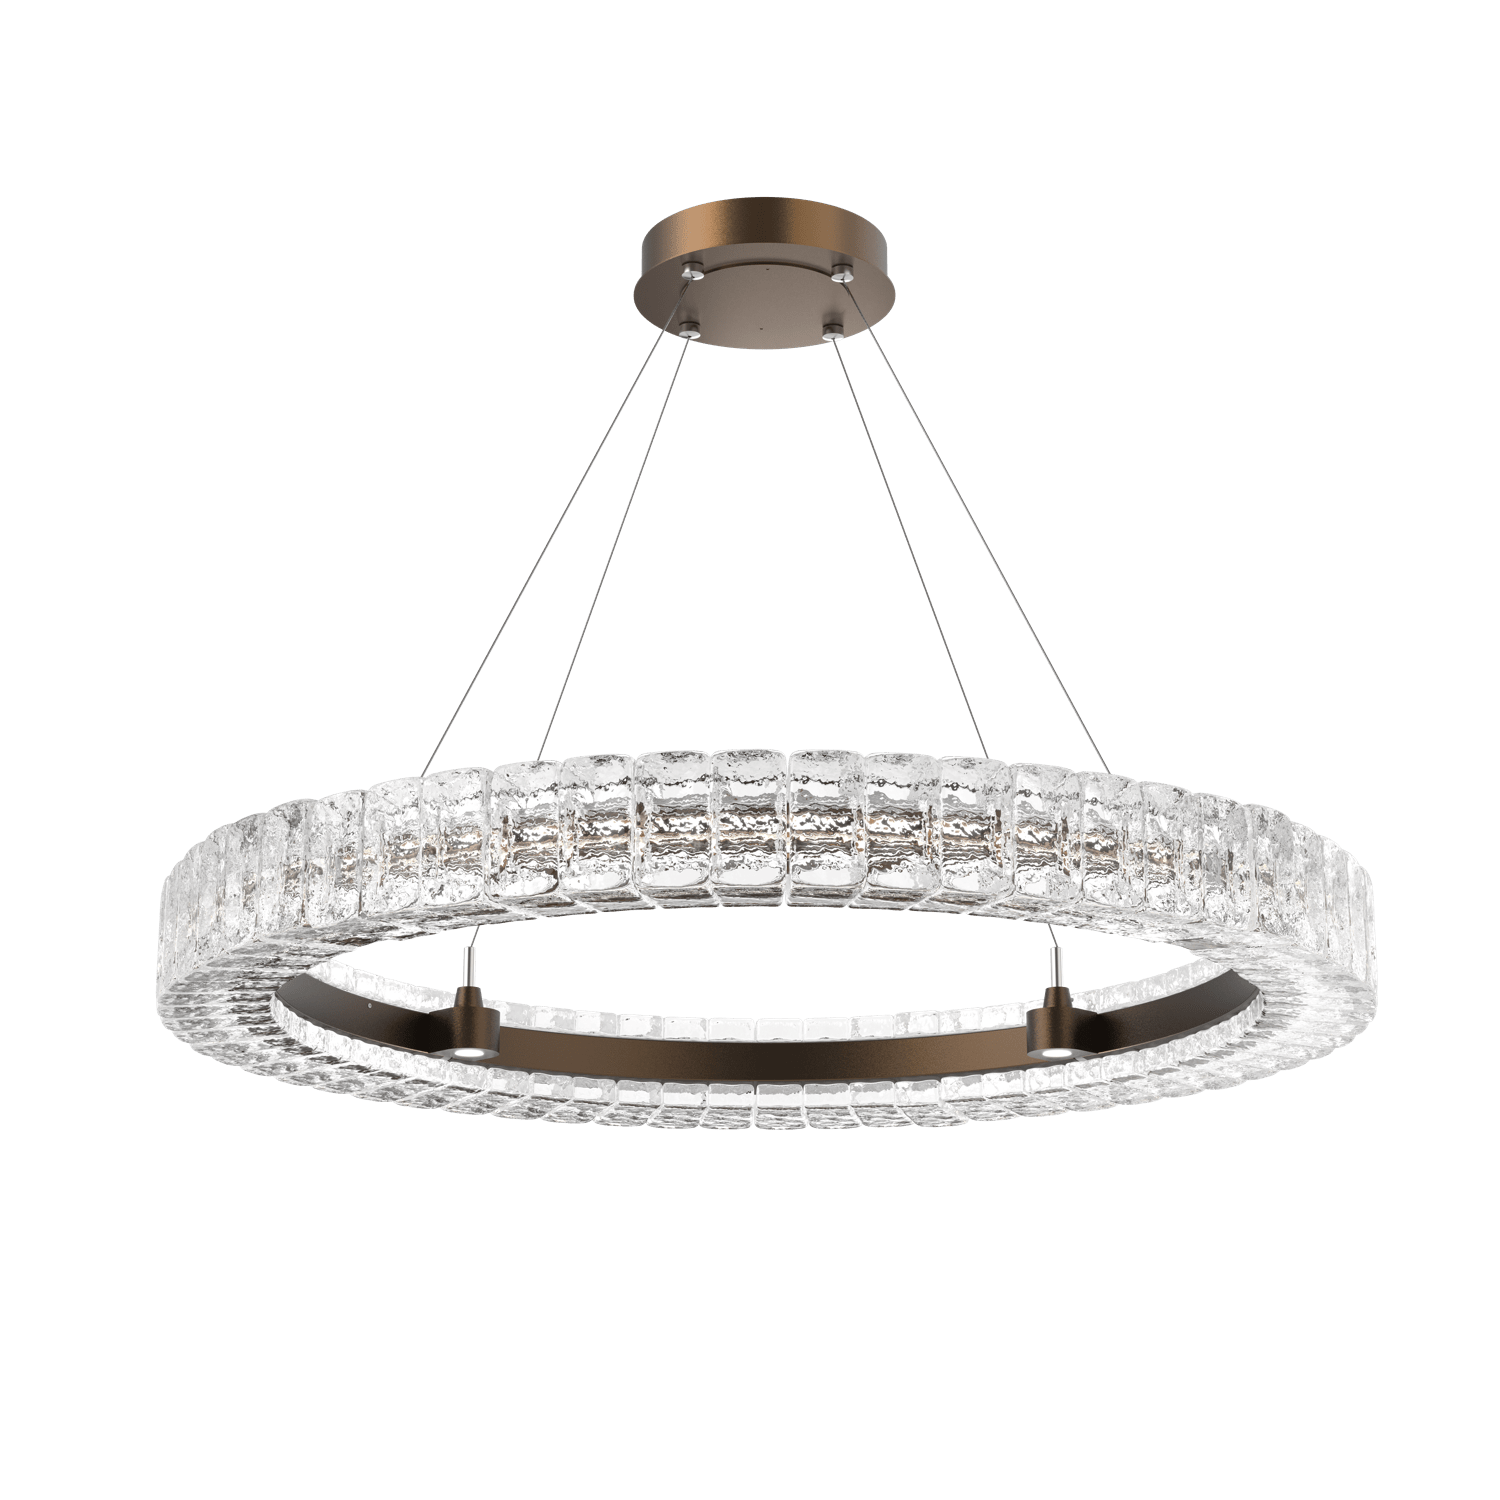 CHB0080-36-FB-Hammerton-Studio-Asscher-36-inch-ring-chandelier-with-flat-bronze-finish-and-clear-cast-glass-shades-and-LED-lamping